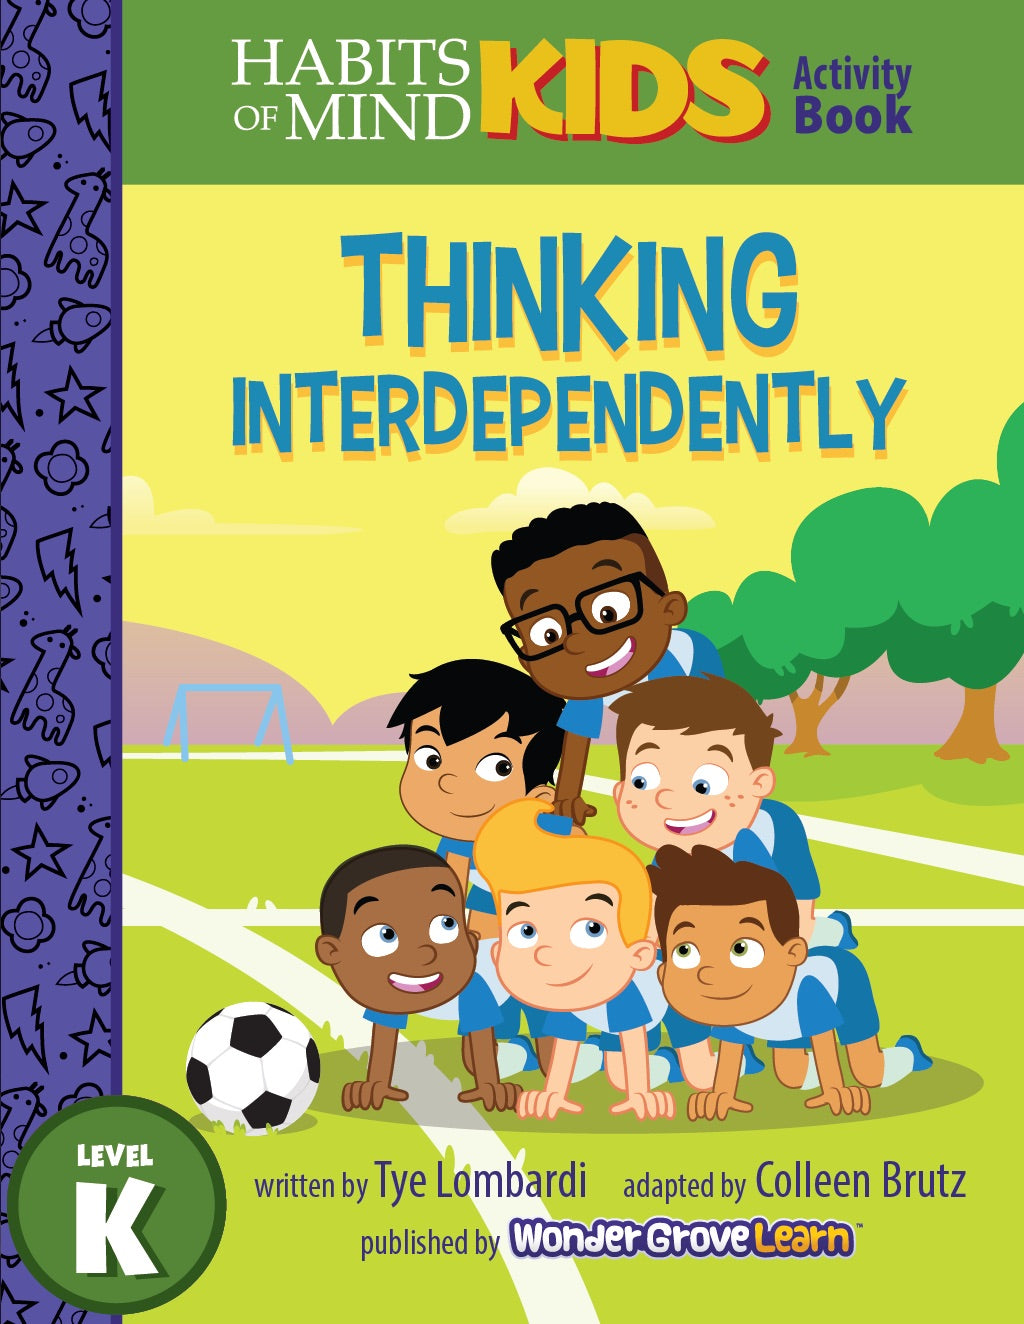 Thinking Interdependently: A Habits of Mind Story for Kindergarten